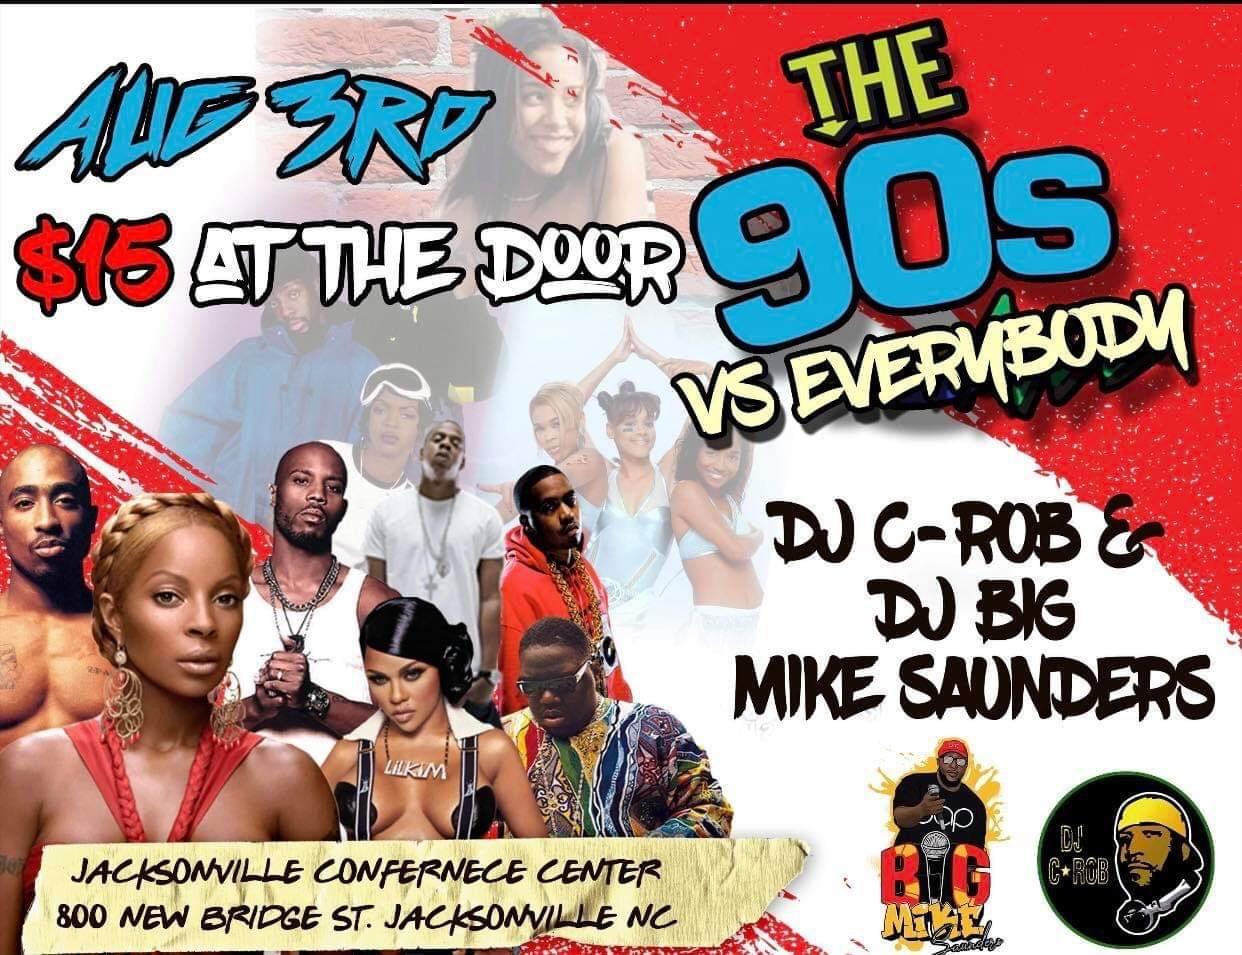 The 90s vs Everybody  Day Party